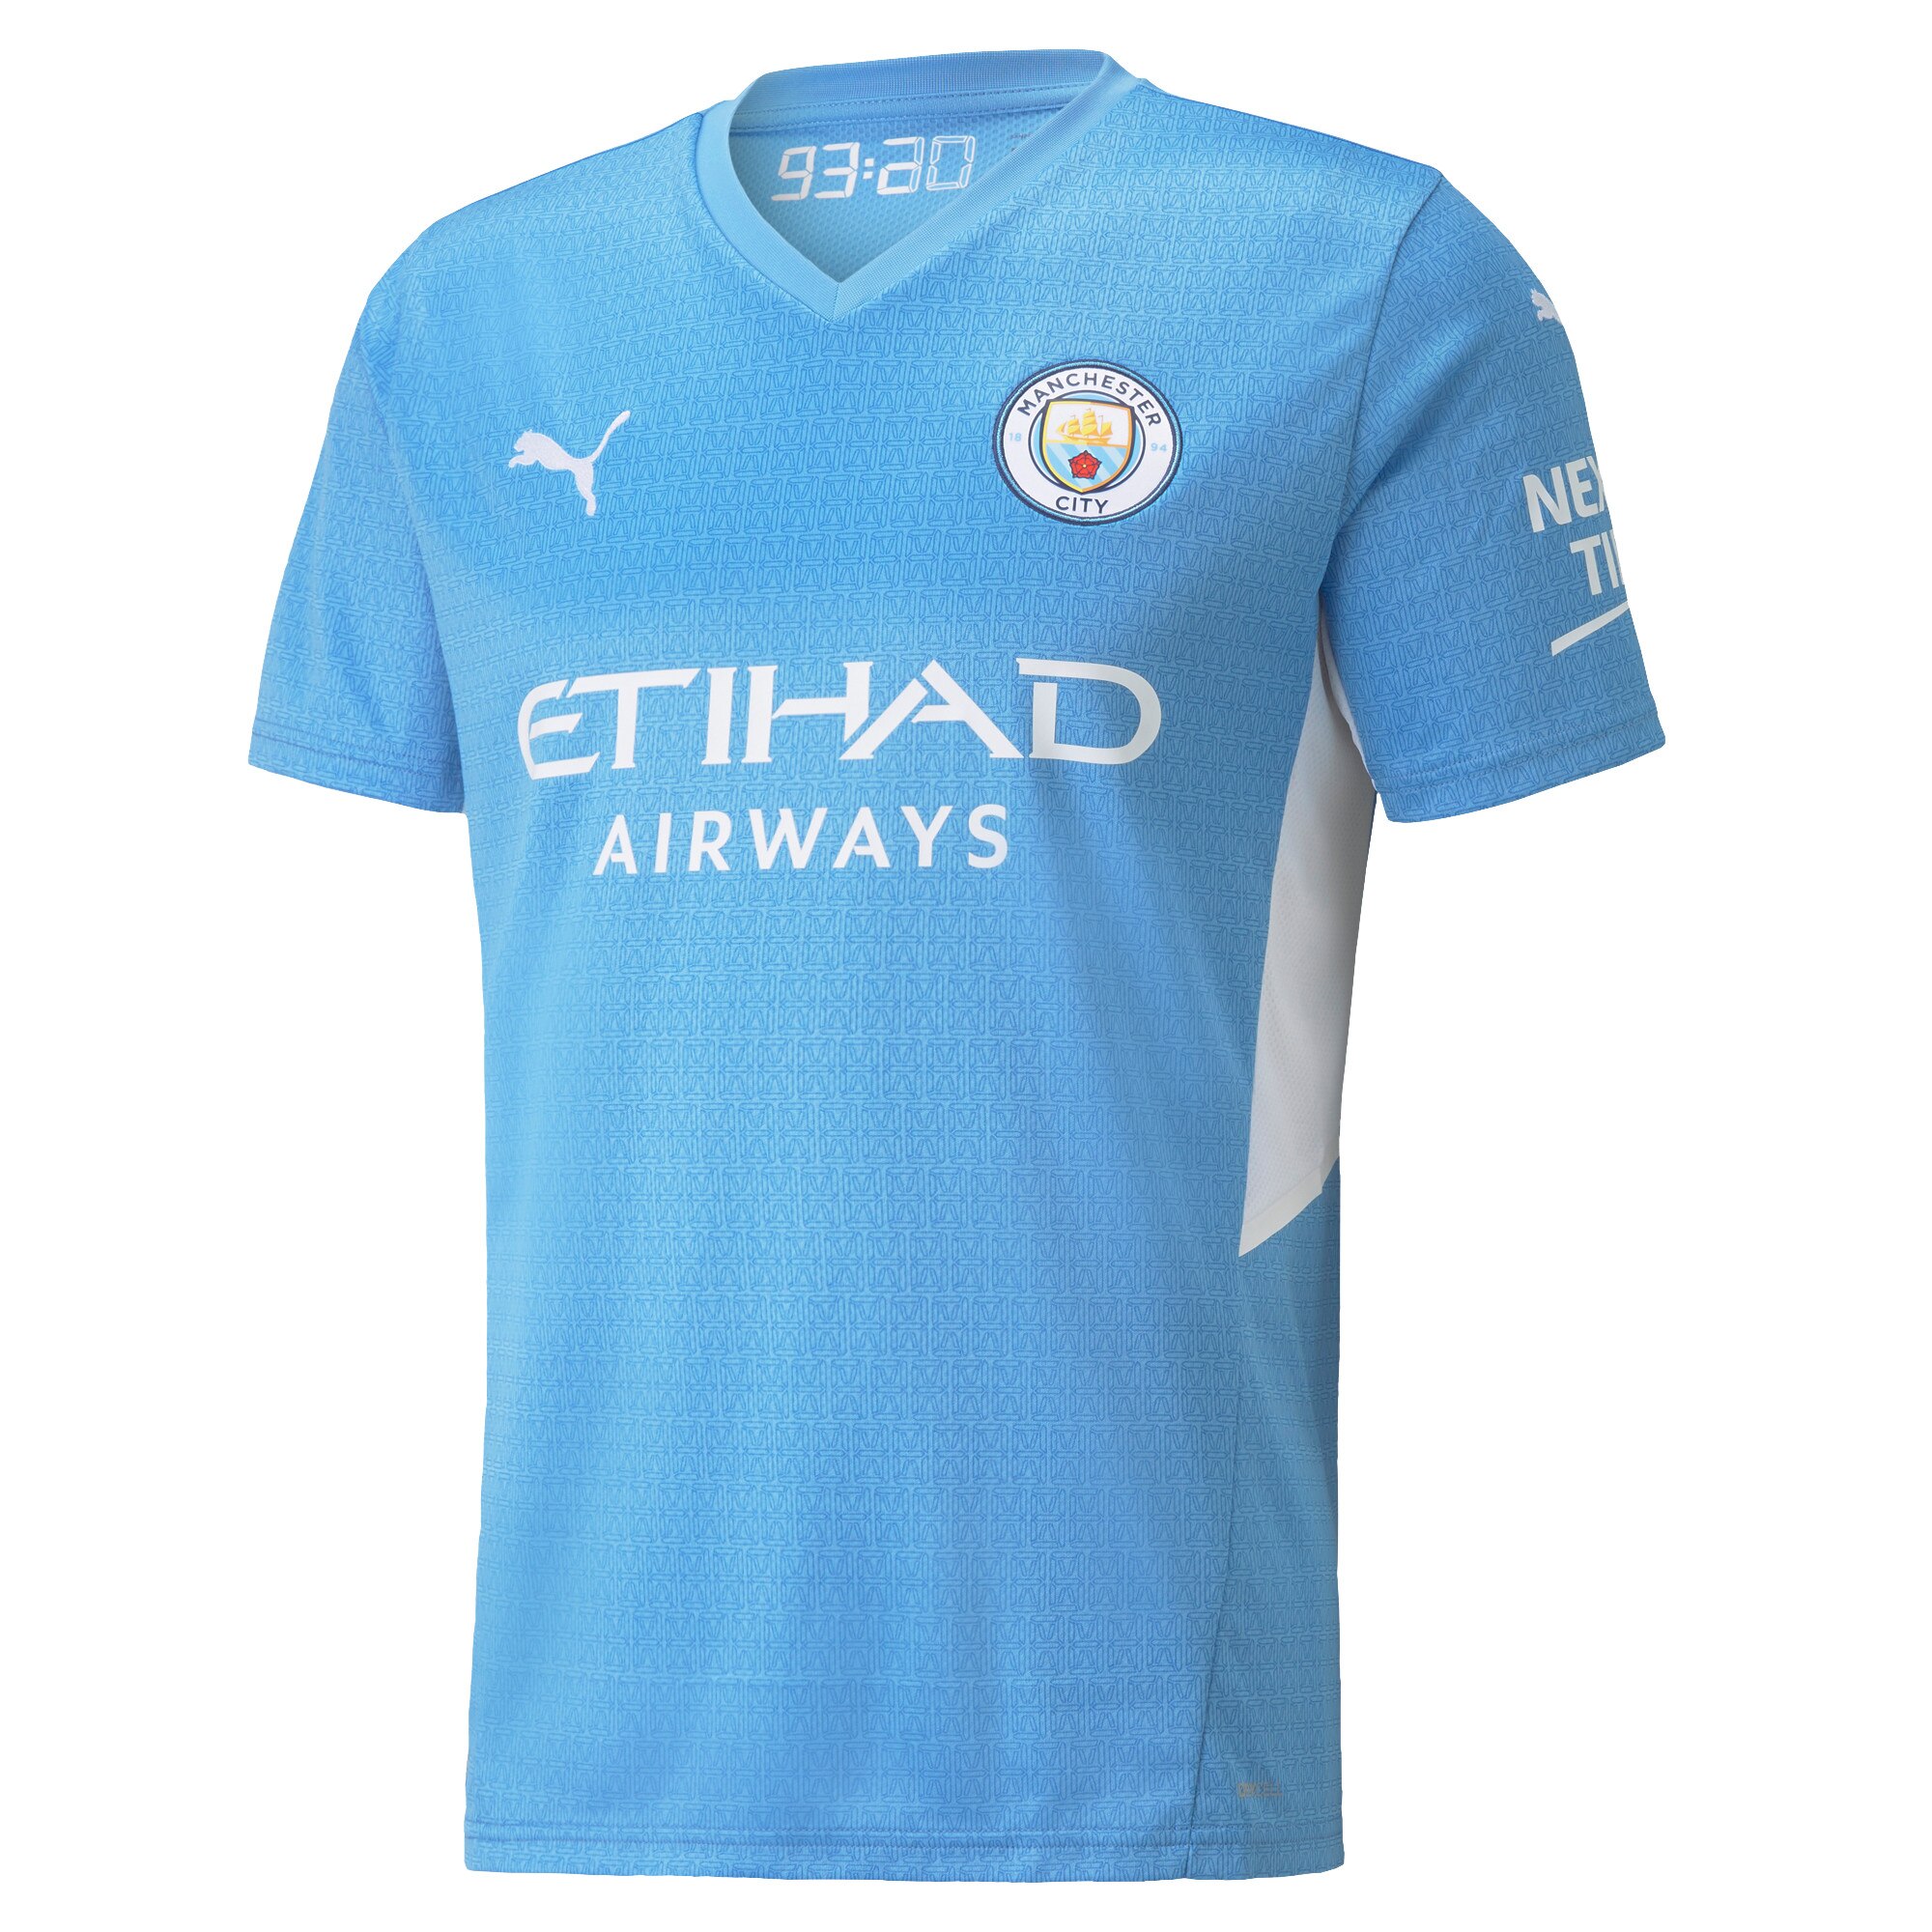 Manchester City Home Shirt 2021-22 with Grealish 10 printing